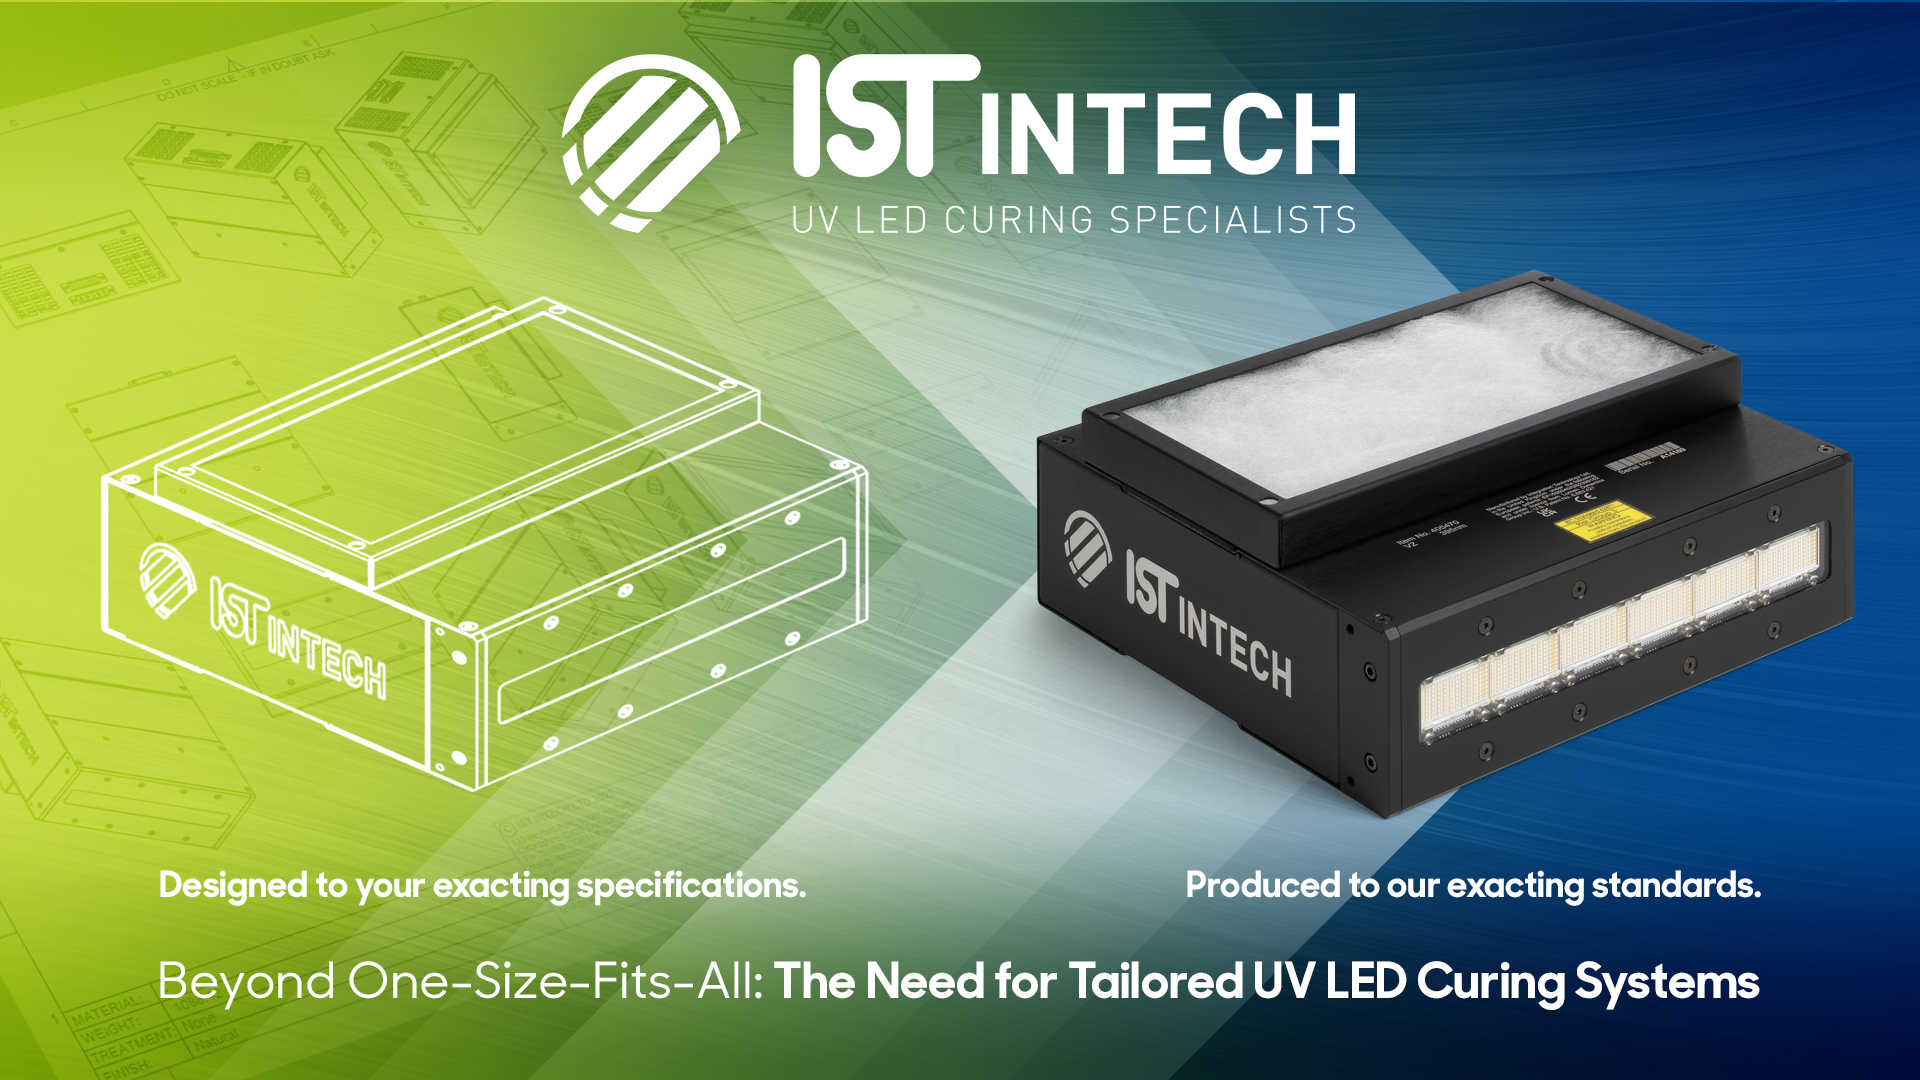 Beyond One-Size-Fits-All: The Need for a Tailored UV LED Curing System